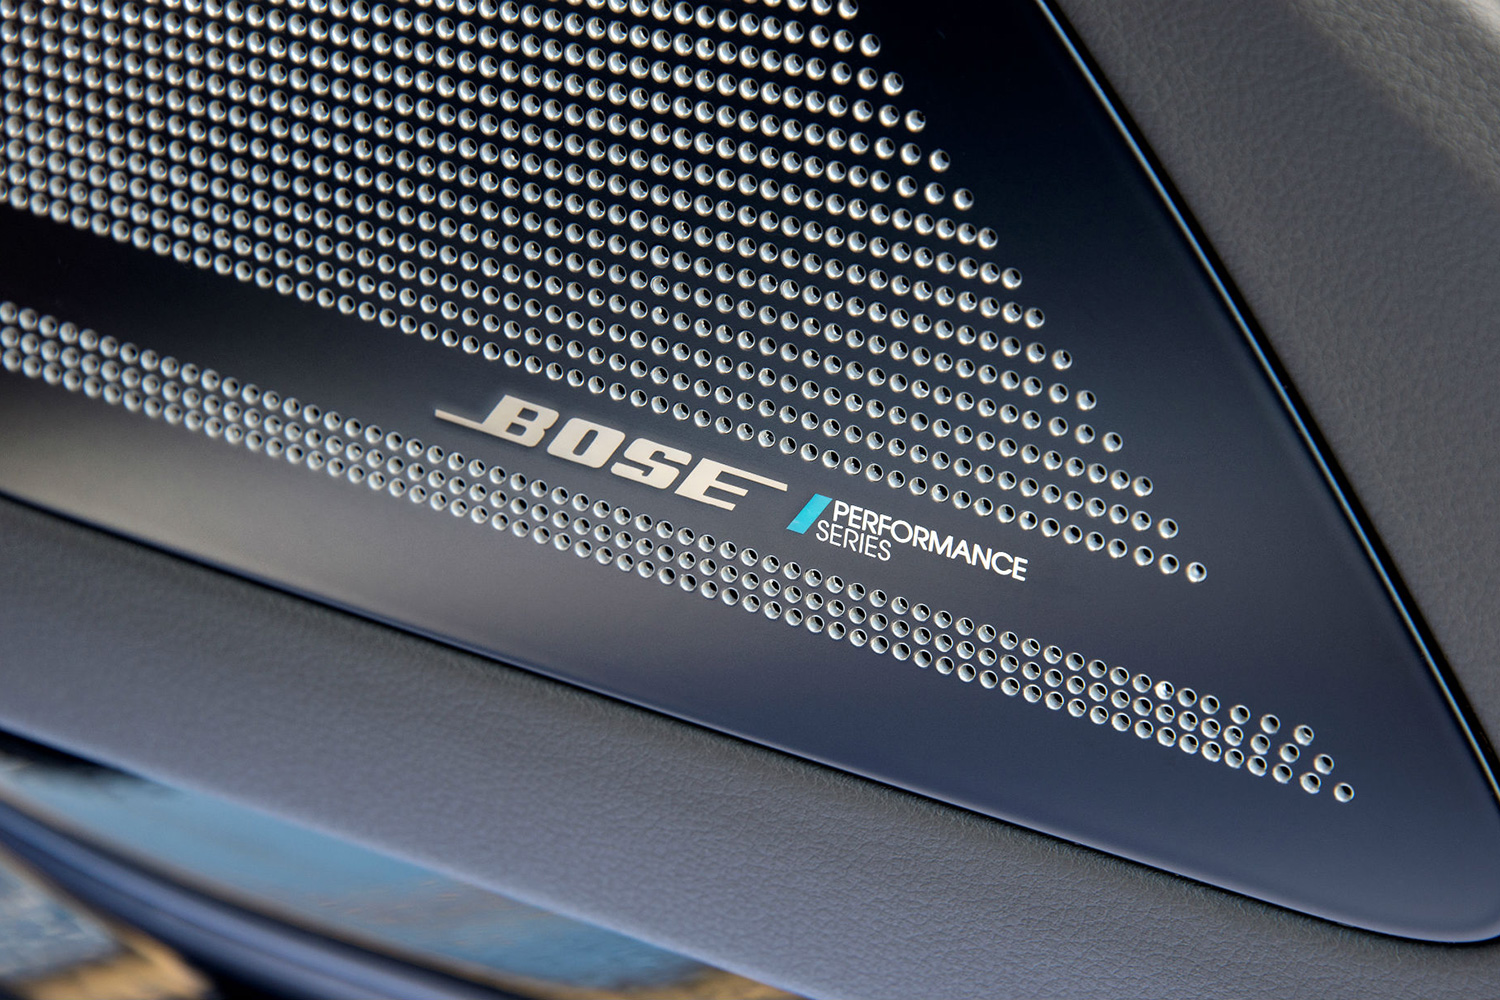 Begunstigde Uitbreiding Nauw How Bose is making advanced car audio systems affordable | Digital Trends